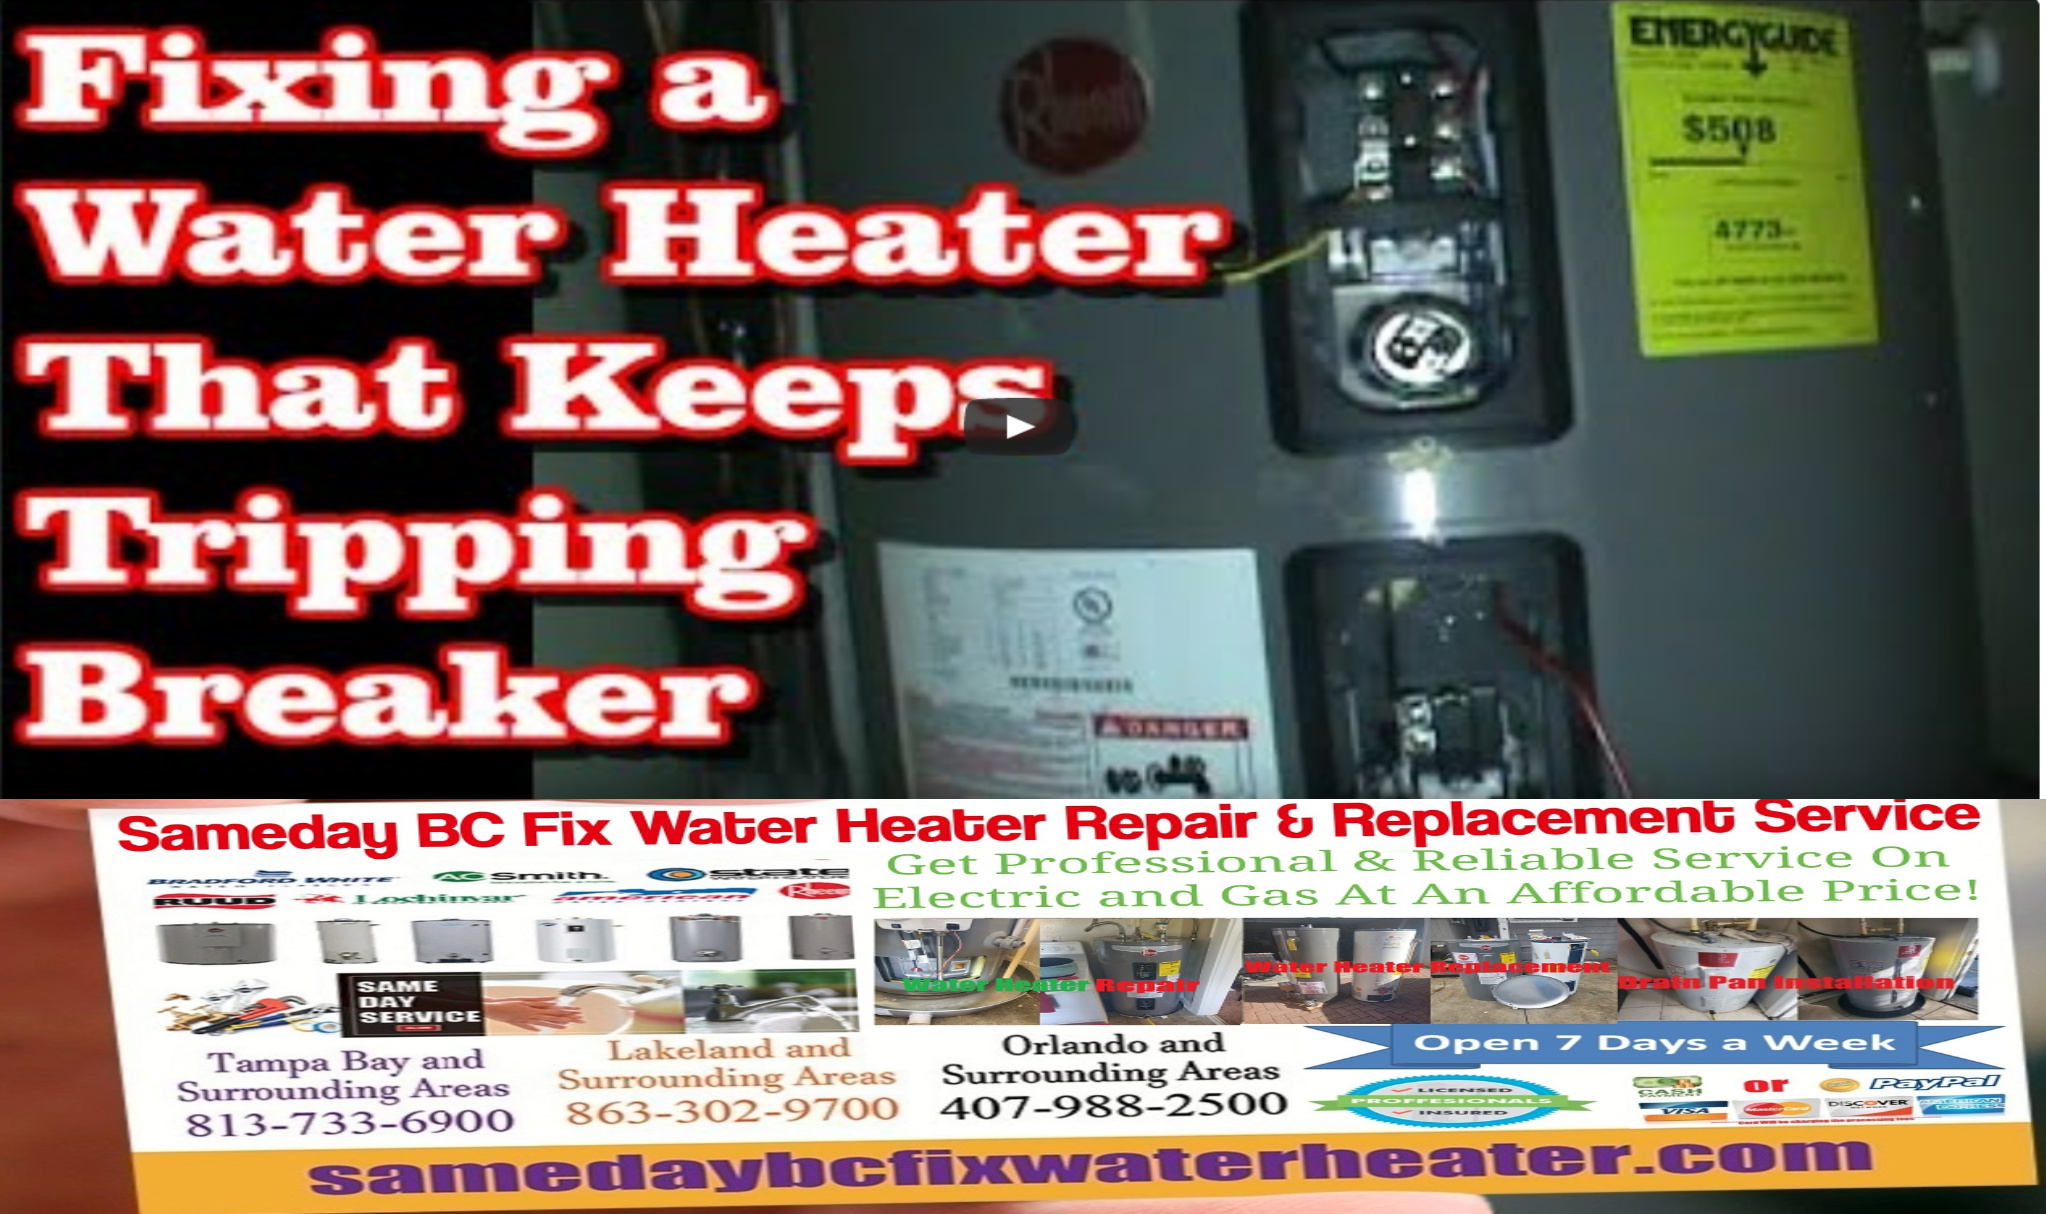 Water Heater Breaker Keep Tripping Repair, Replacement, Installation Service Near Me